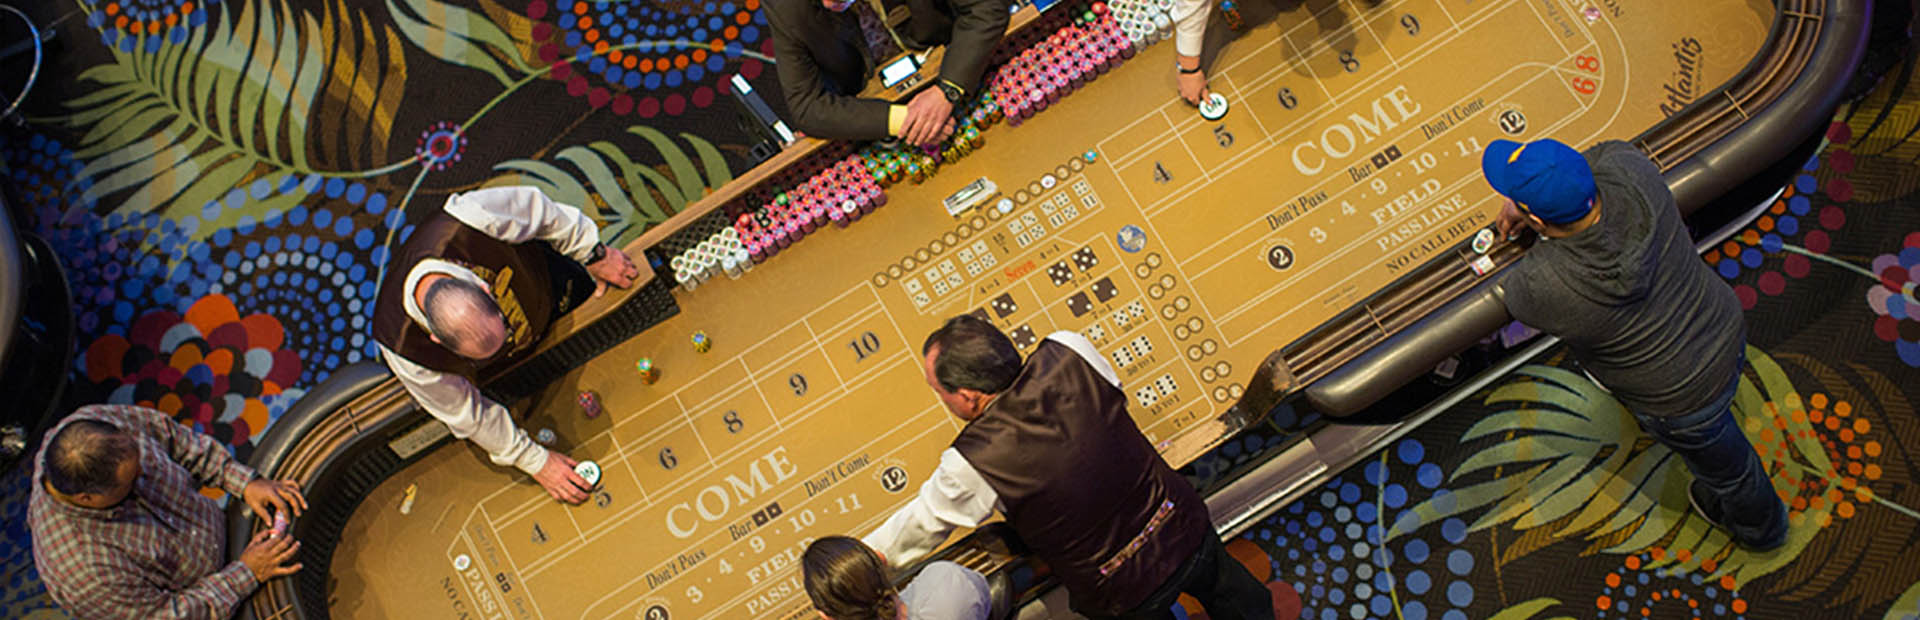 overhead view of craps table at Atlantis